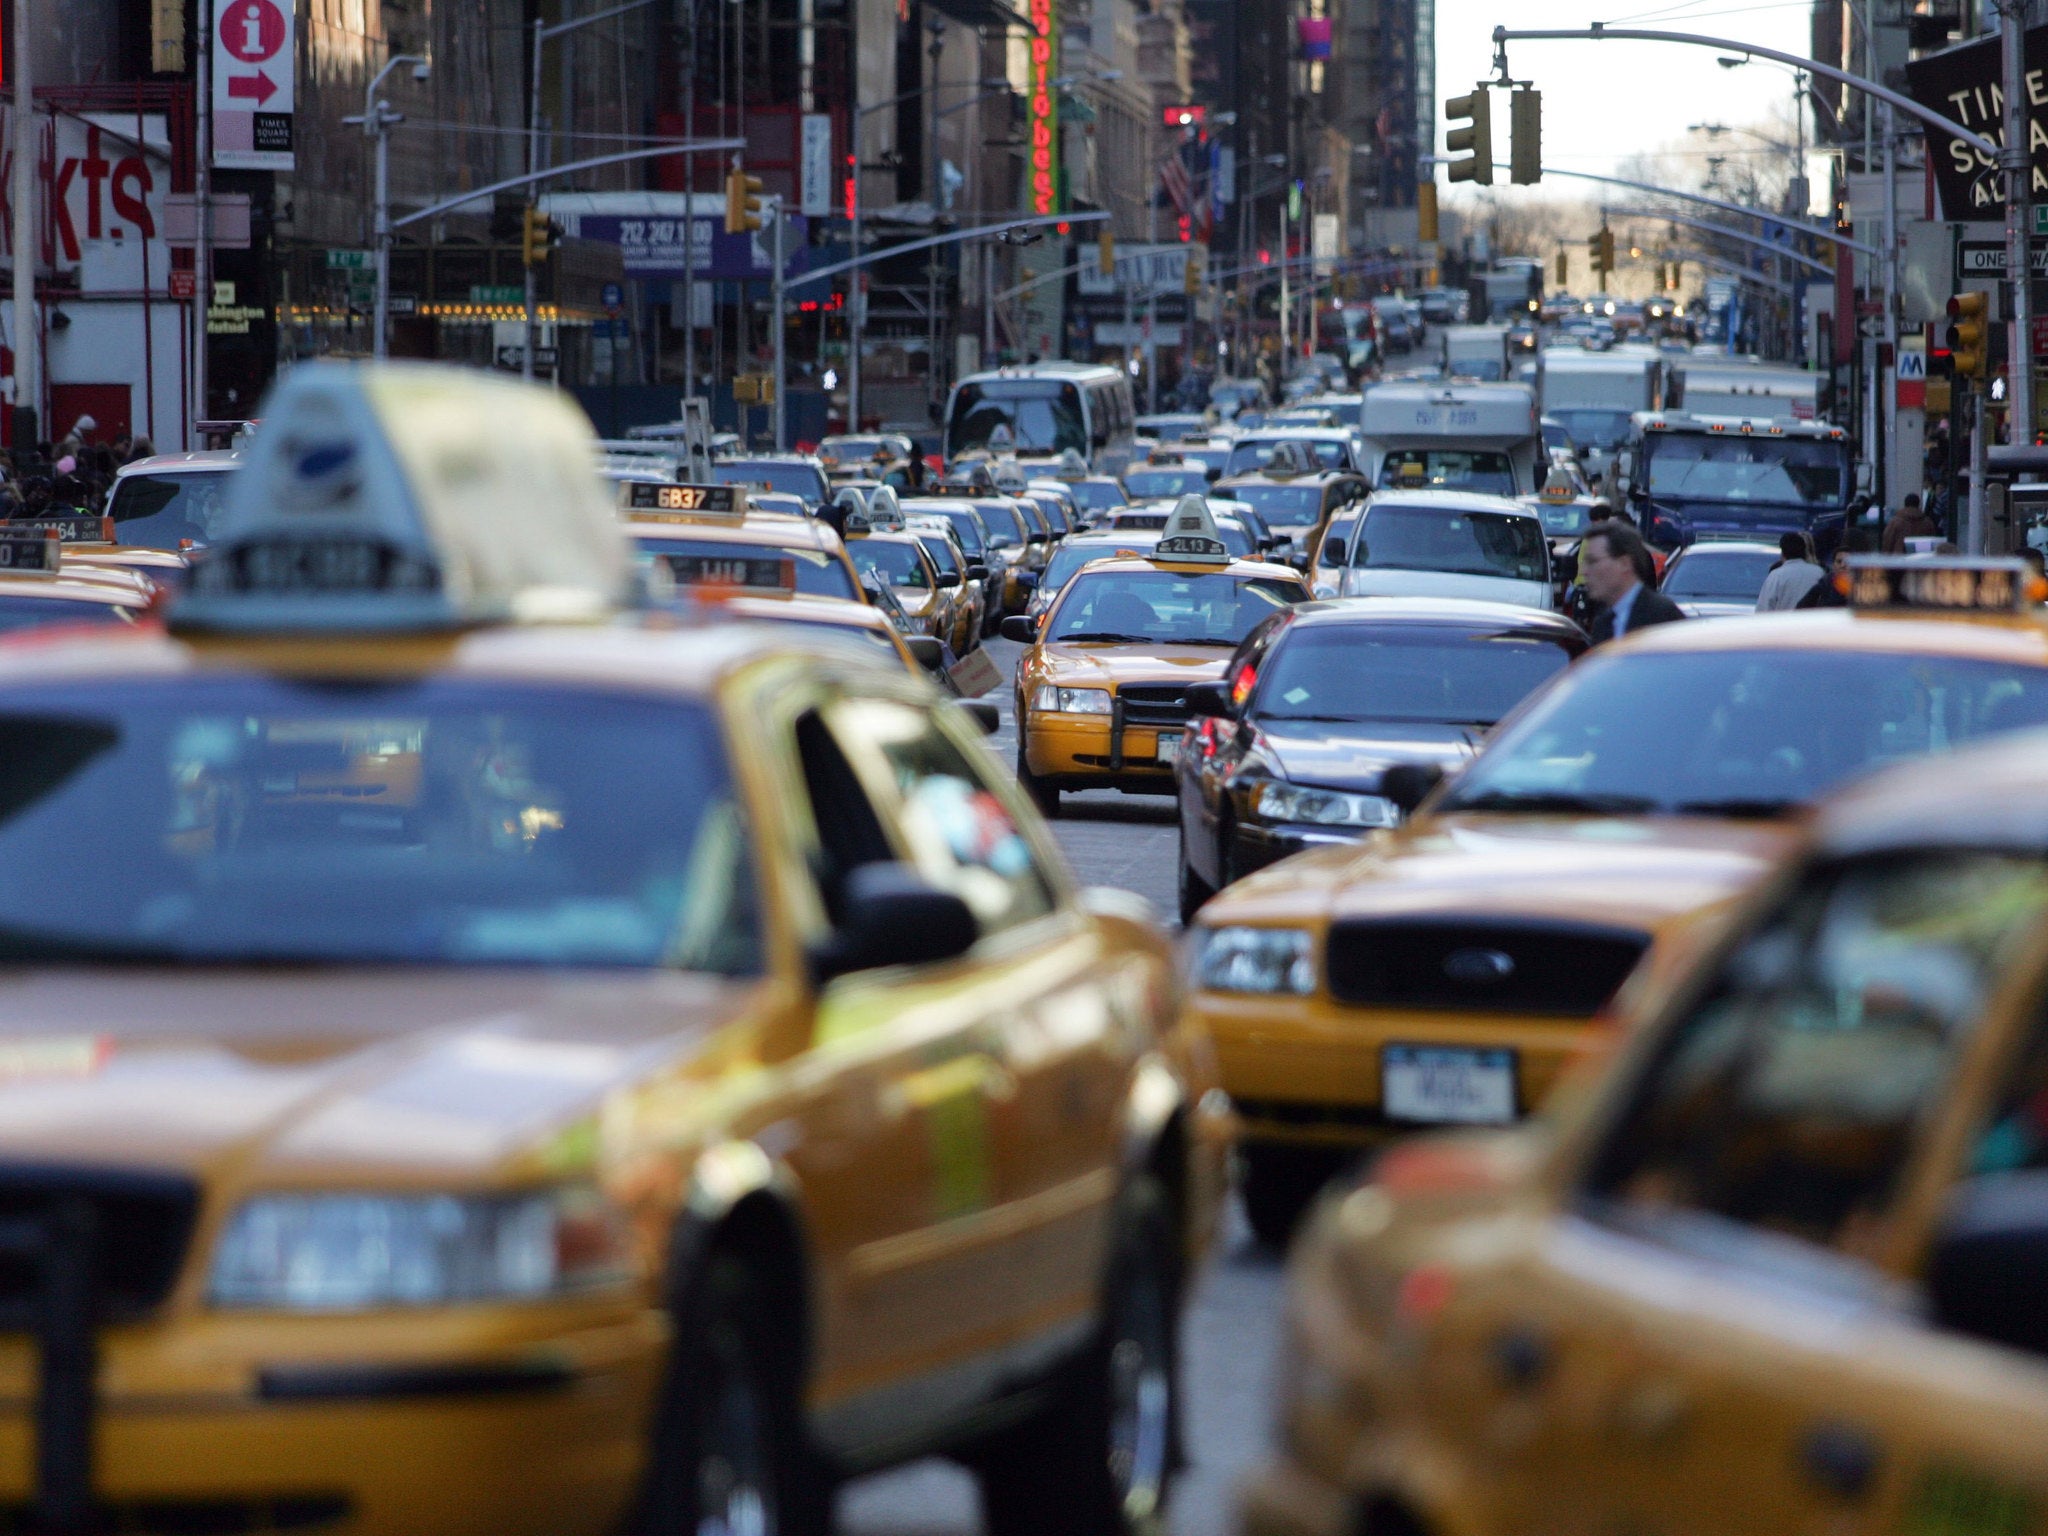 New York City asked Google to deter motorists from making left turns after theywere found to be responsible for high numbers of fatalities